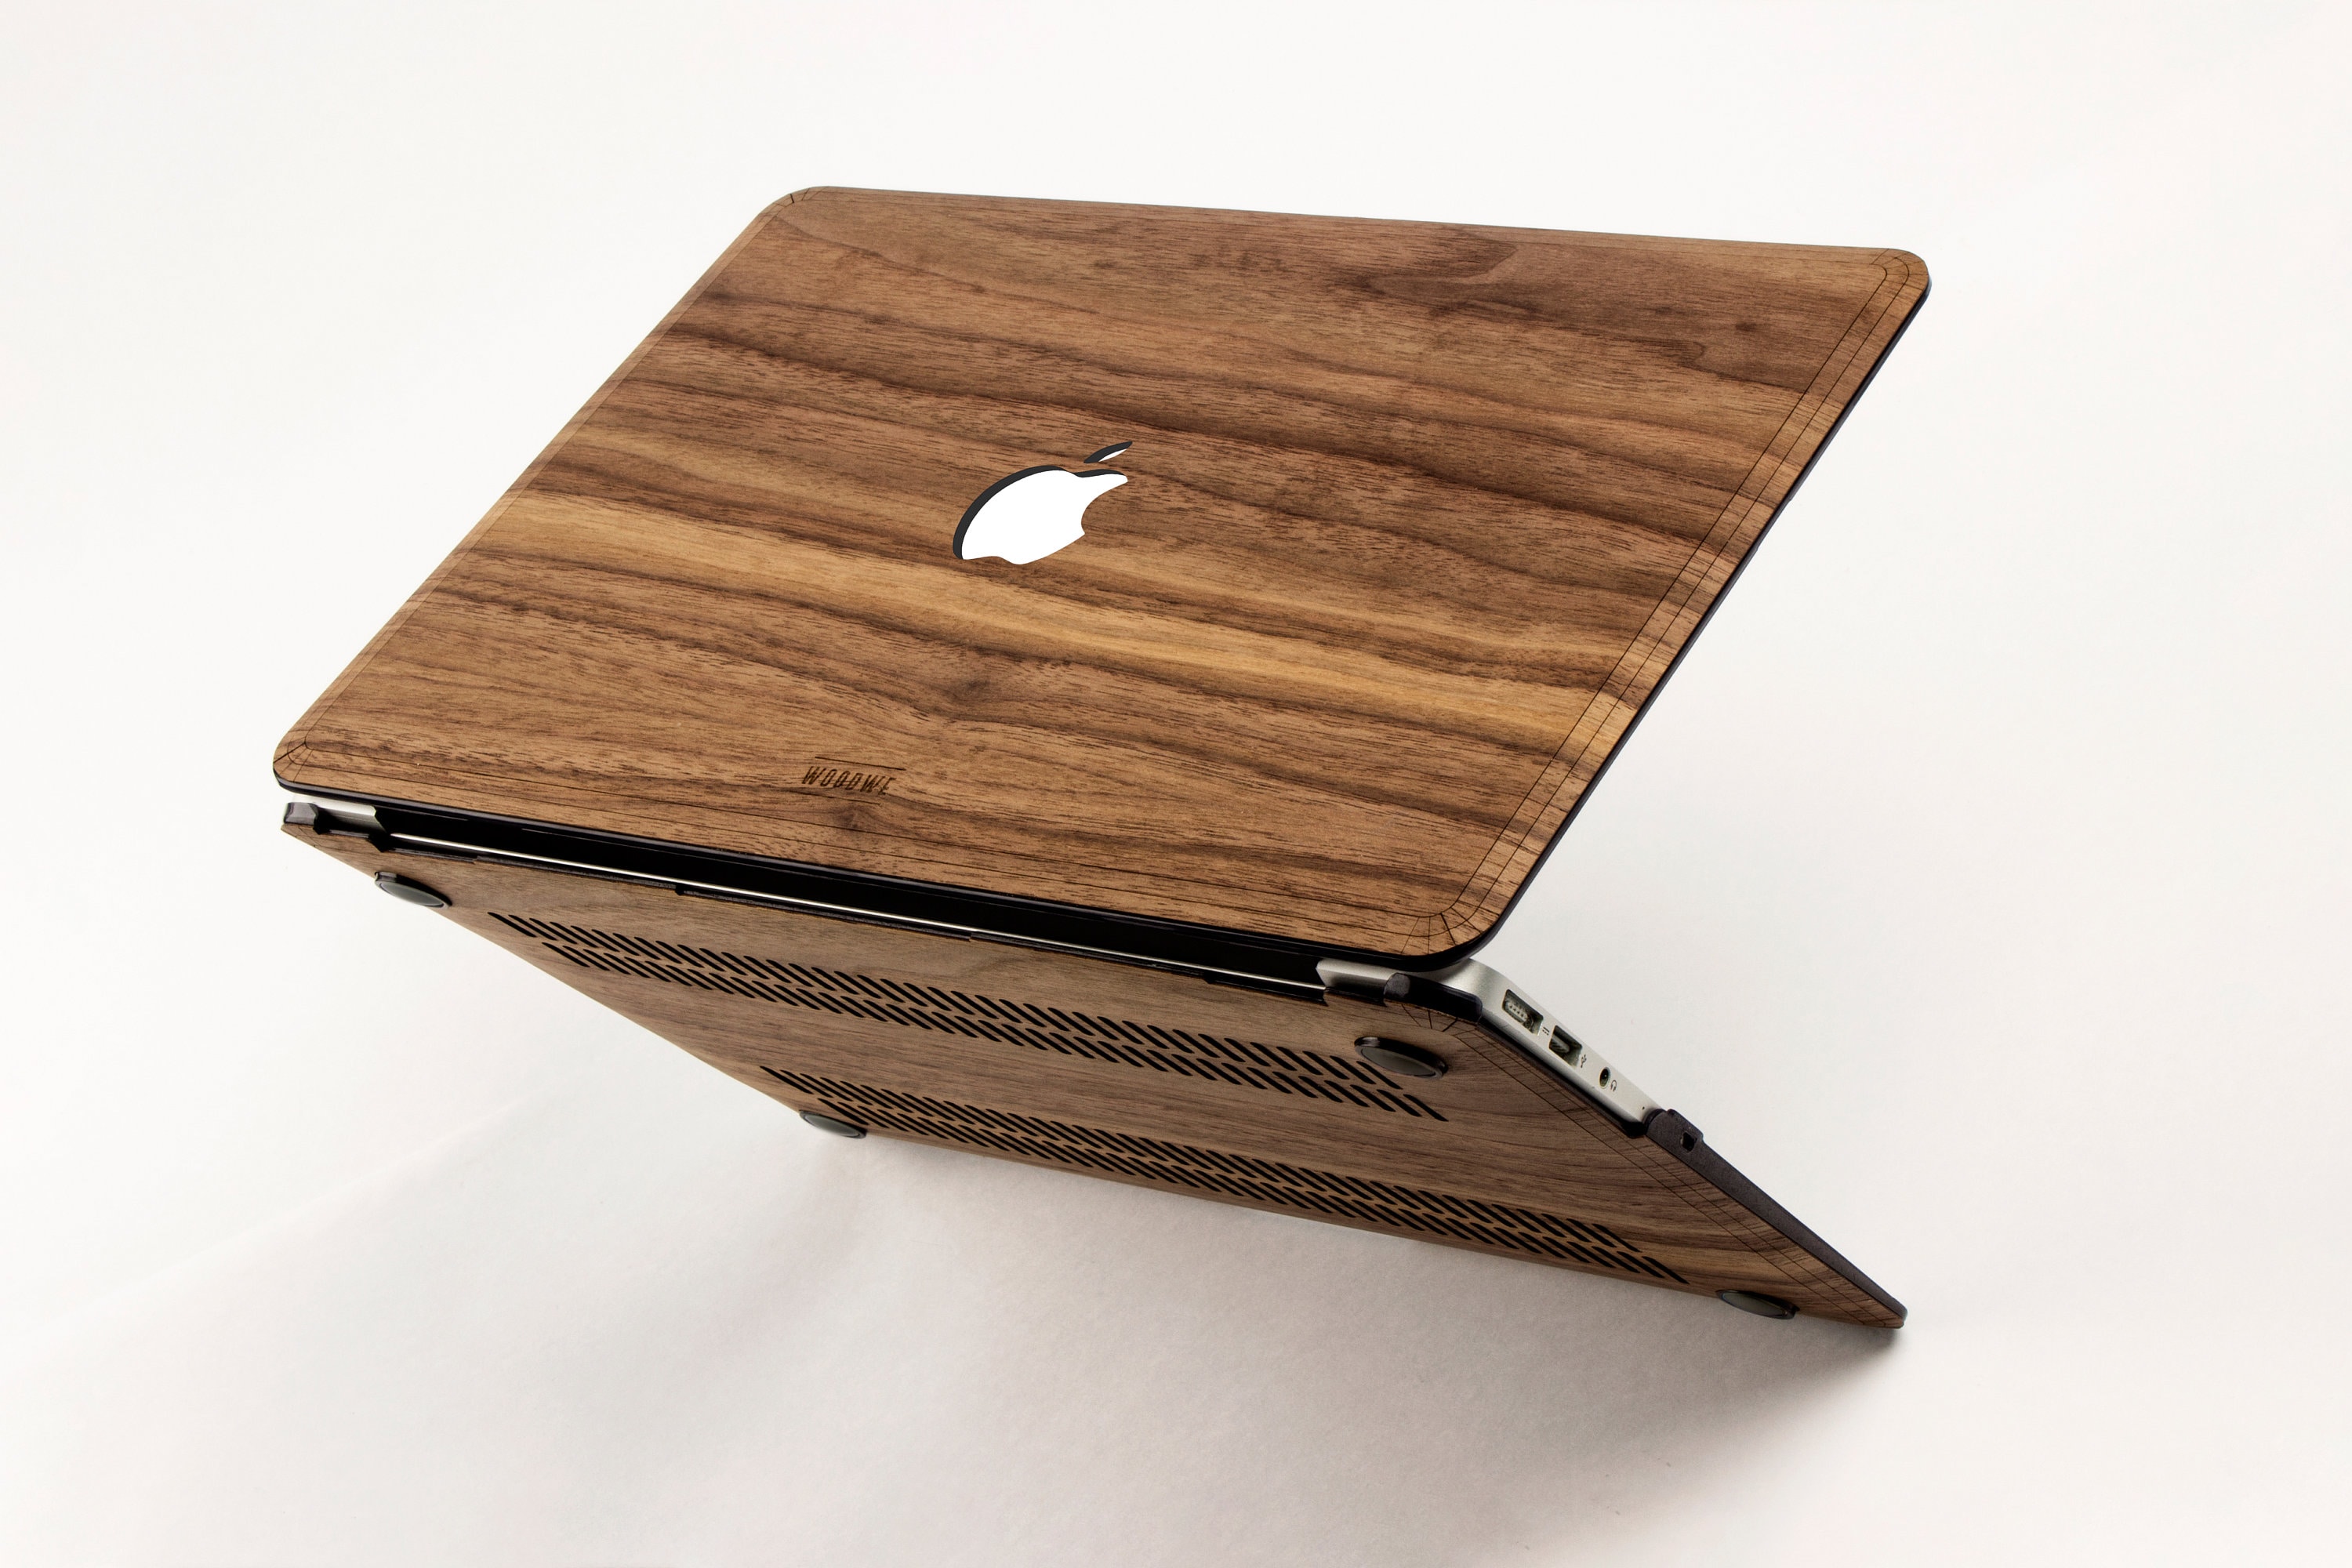 Wooden Wood Texture Cover Case For Apple Macbook Pro Retina Air 11 12 13 15 2016 